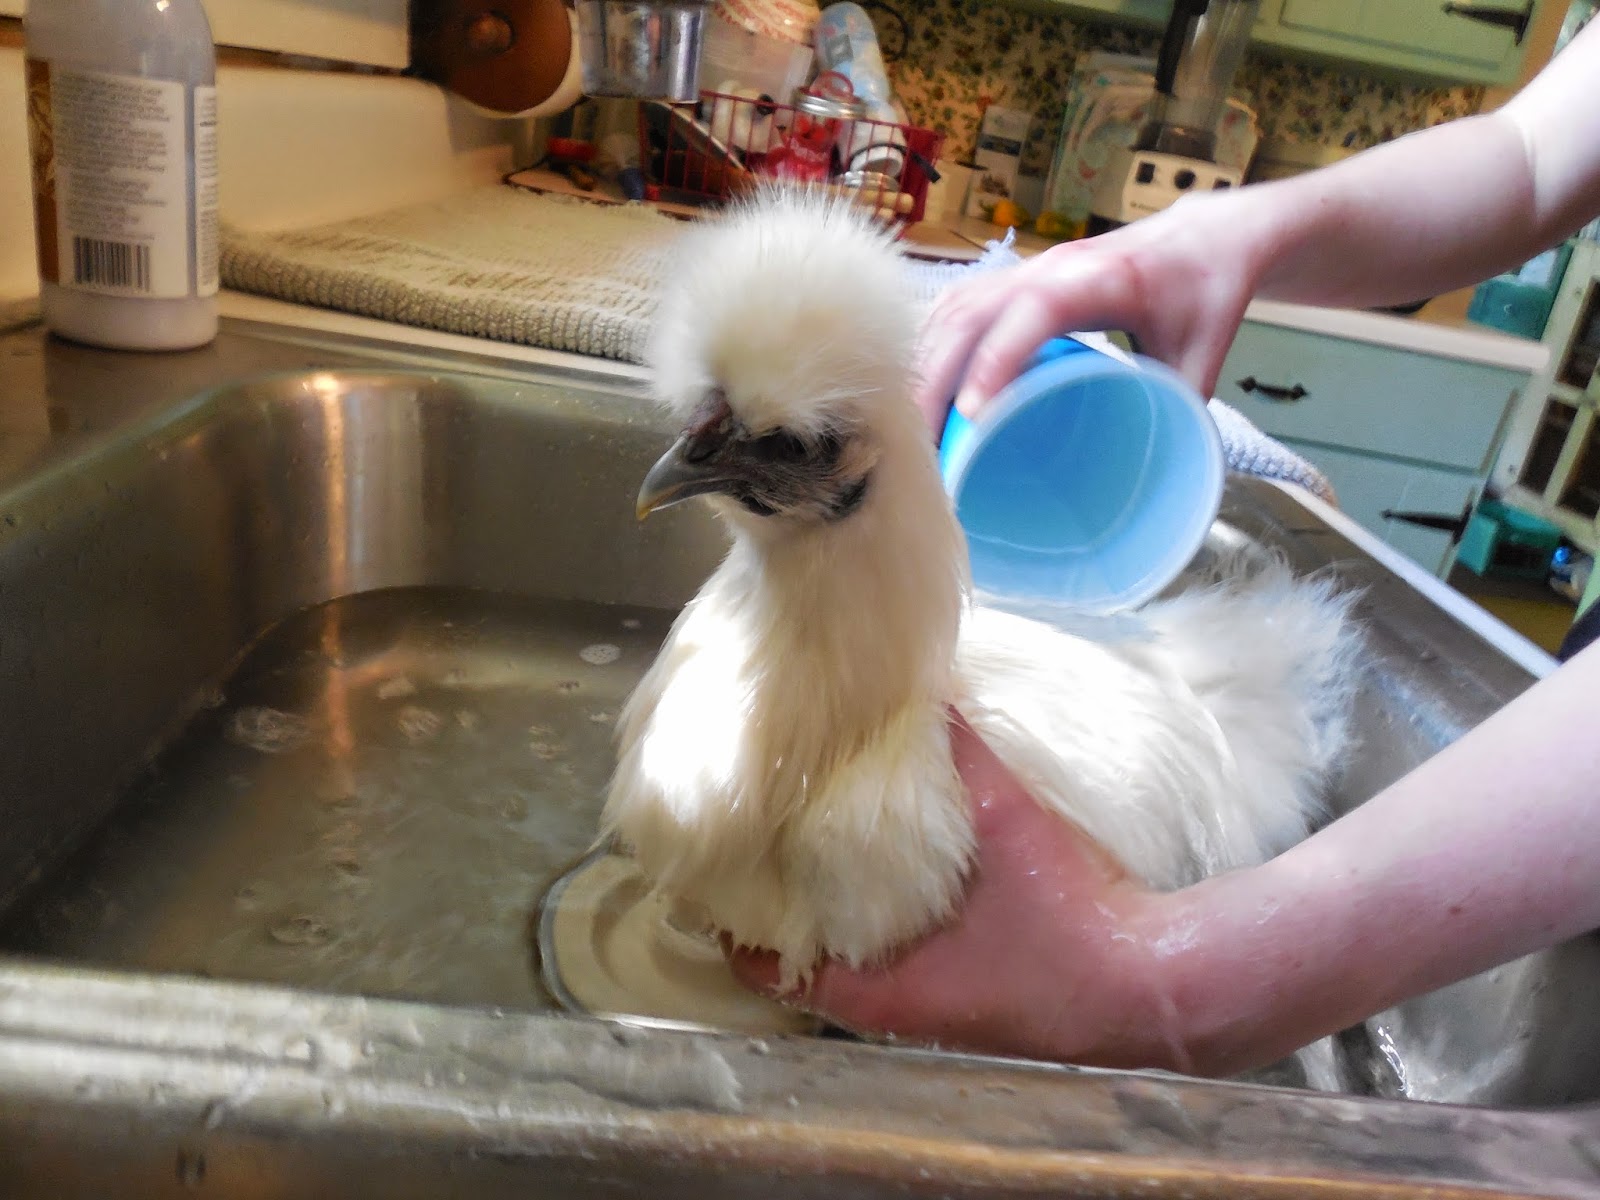 Pray For Lilly Is That A Live Chicken In My Sink